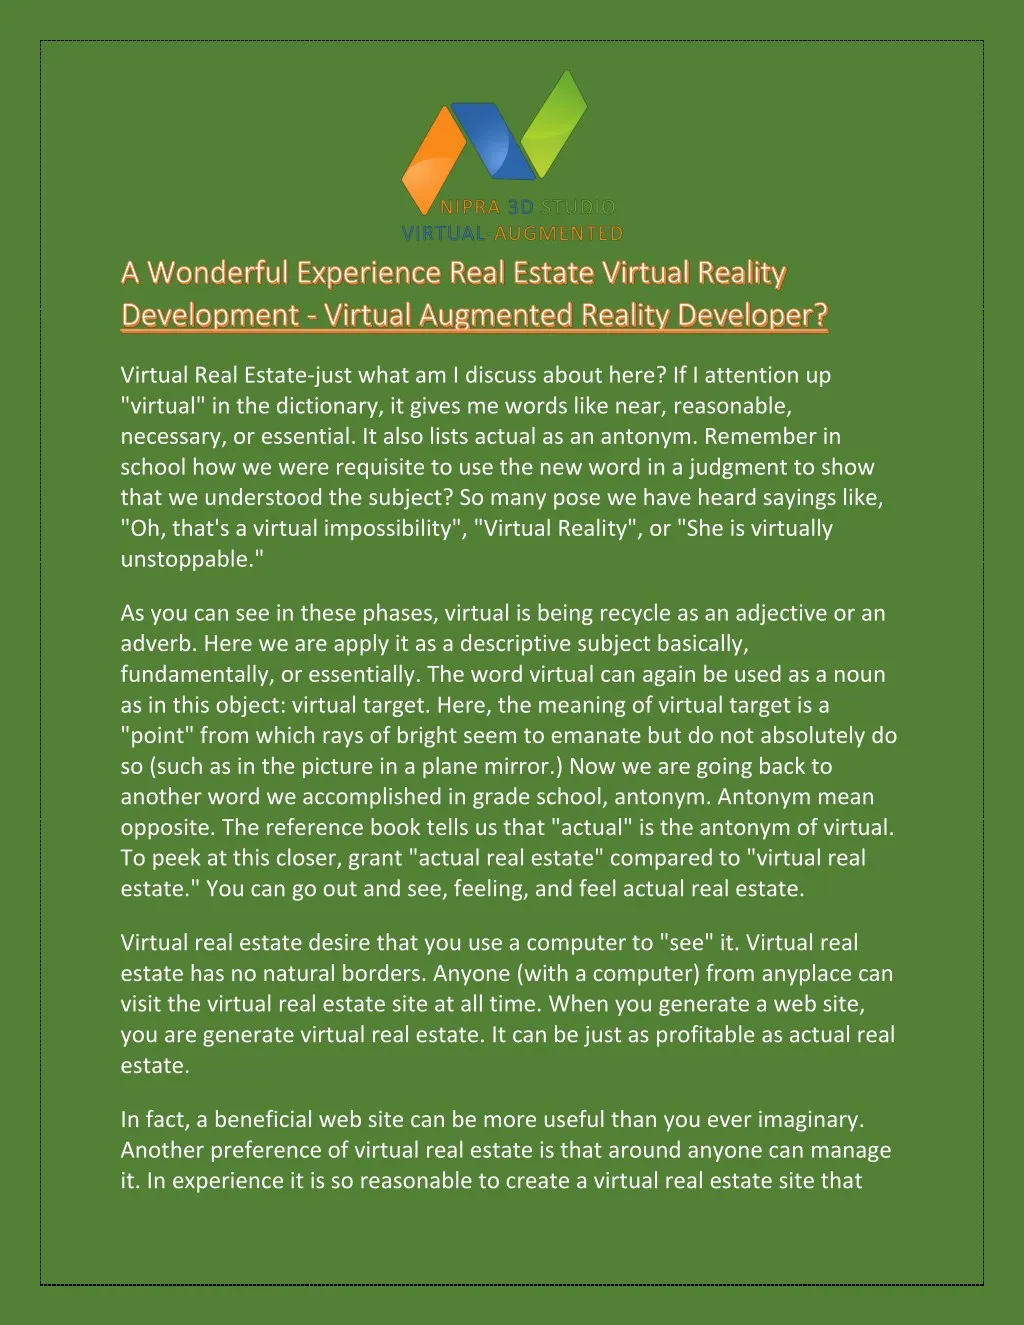 virtual real estate just what am i discuss about